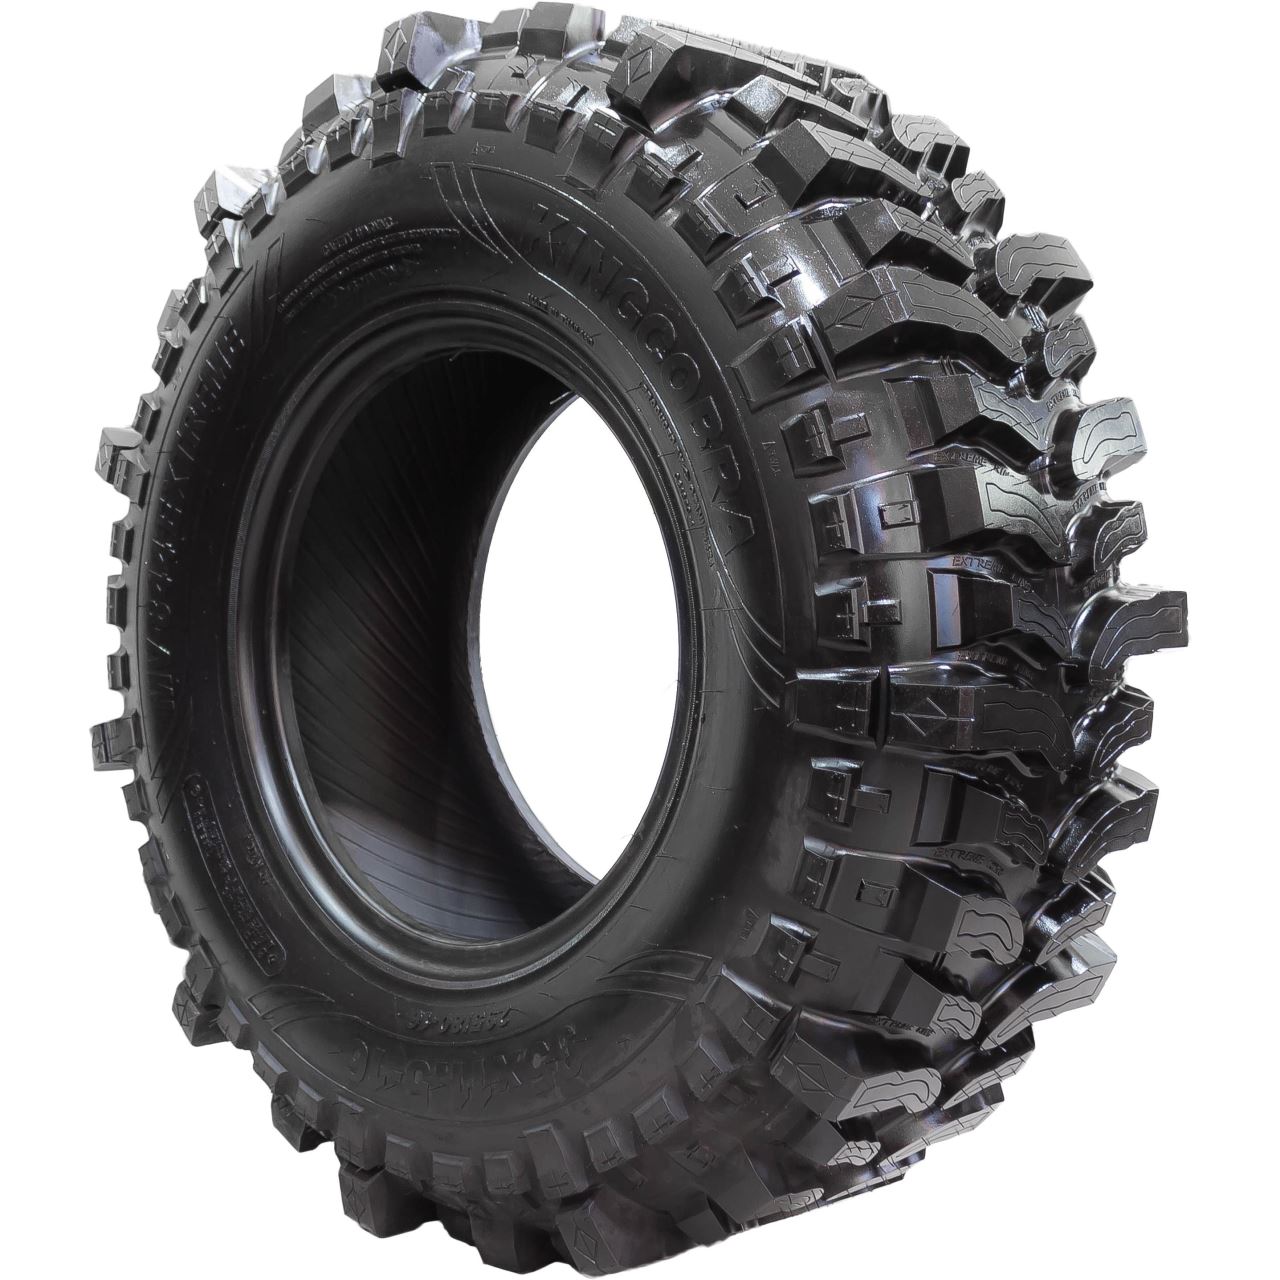 Victor To interact pad Anvelopa Off-Road King Cobra MV-844 35x11.5-17 6PR - eMAG.ro